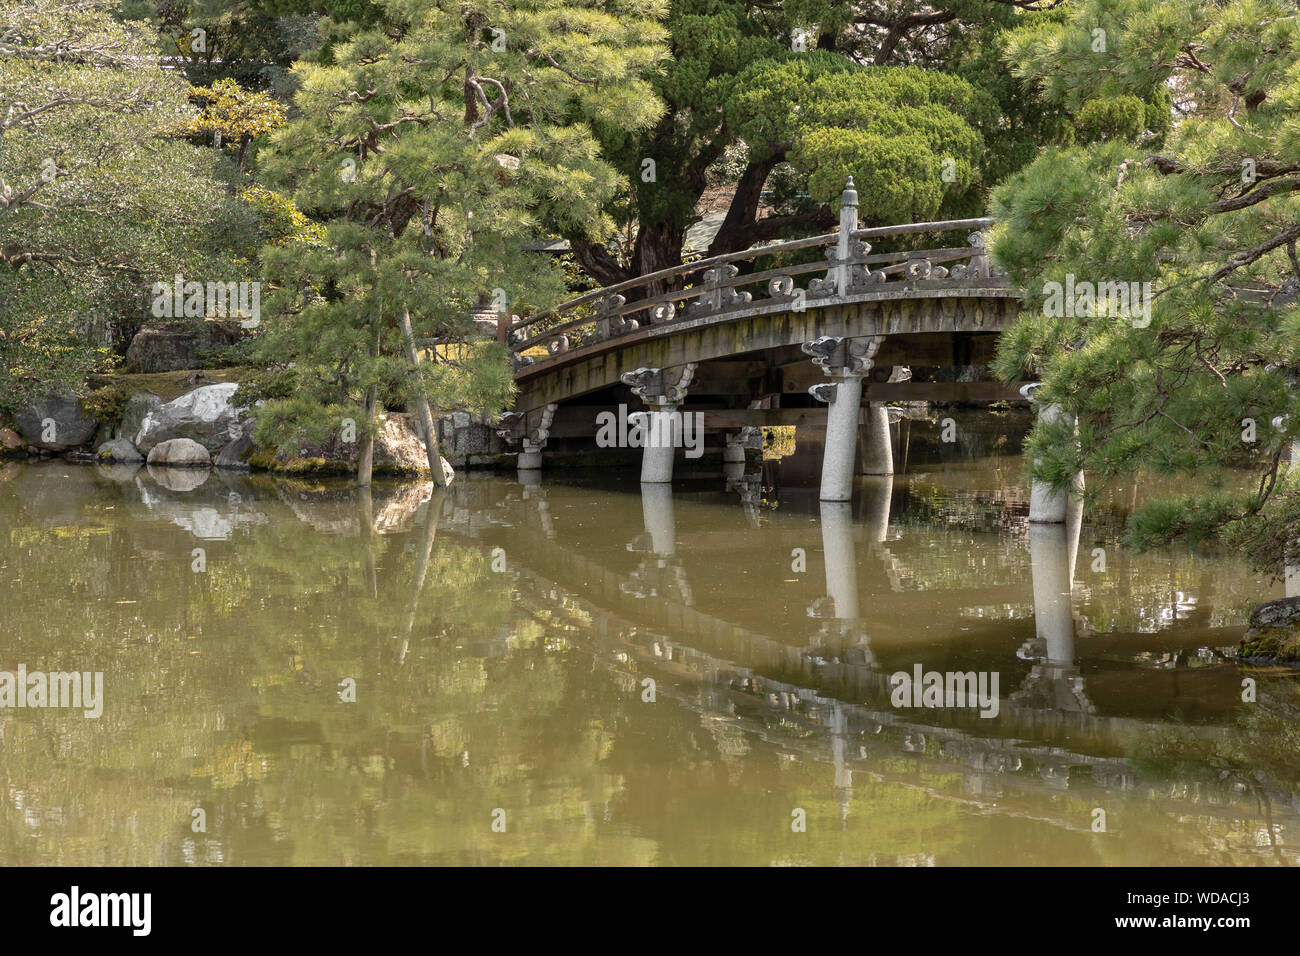 Gardens of the Kyoto Imperial Palace, Japan. Stock Photo